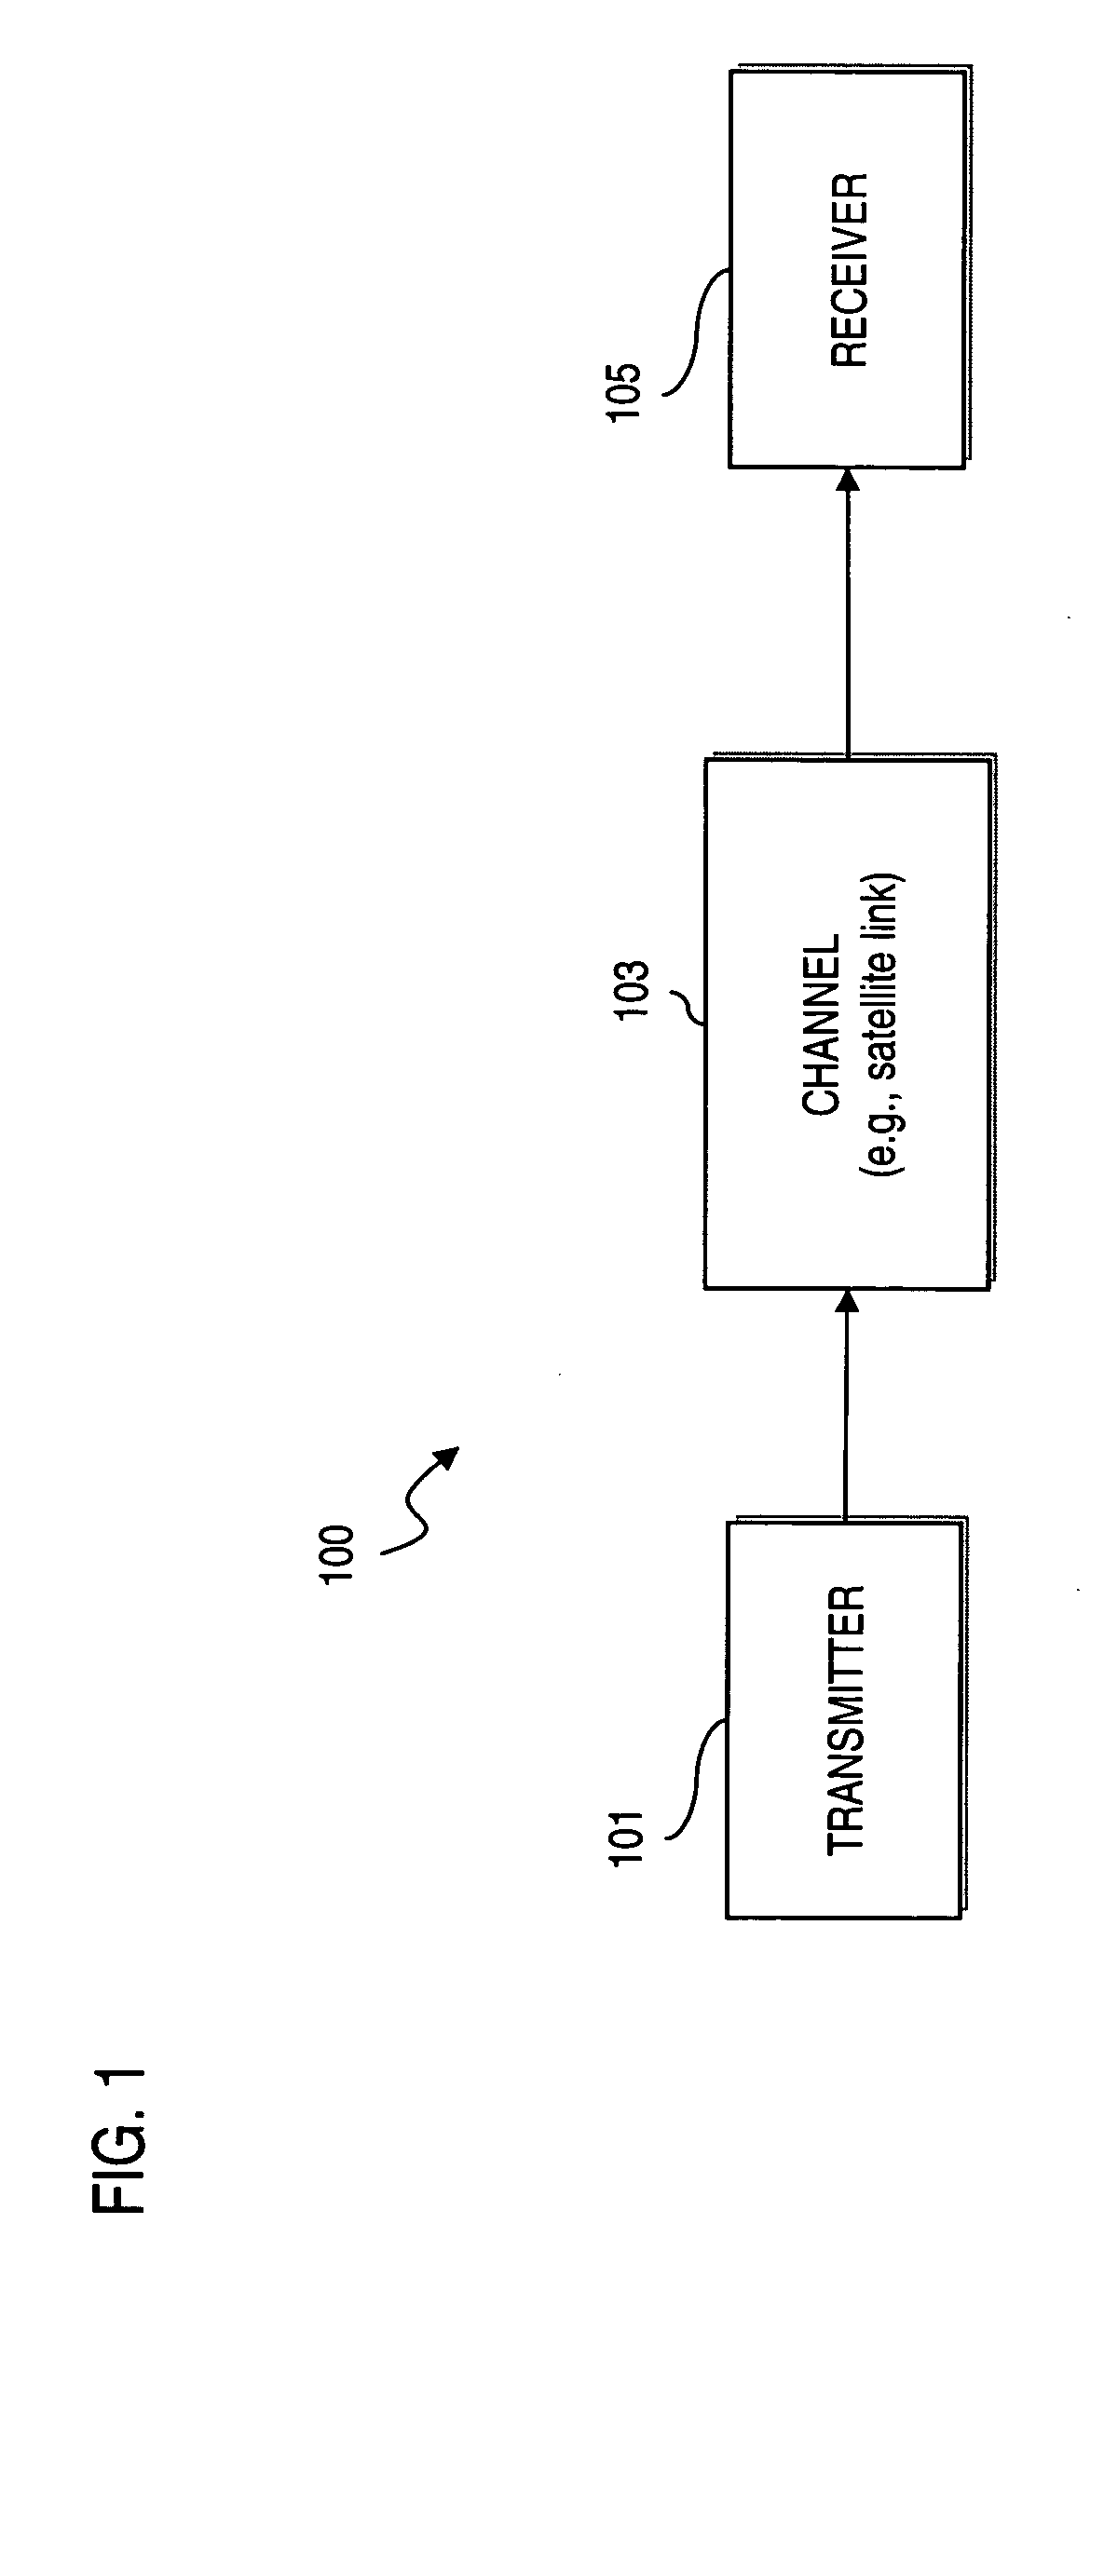 Method and system for providing long and short block length low density parity check (LDPC) codes